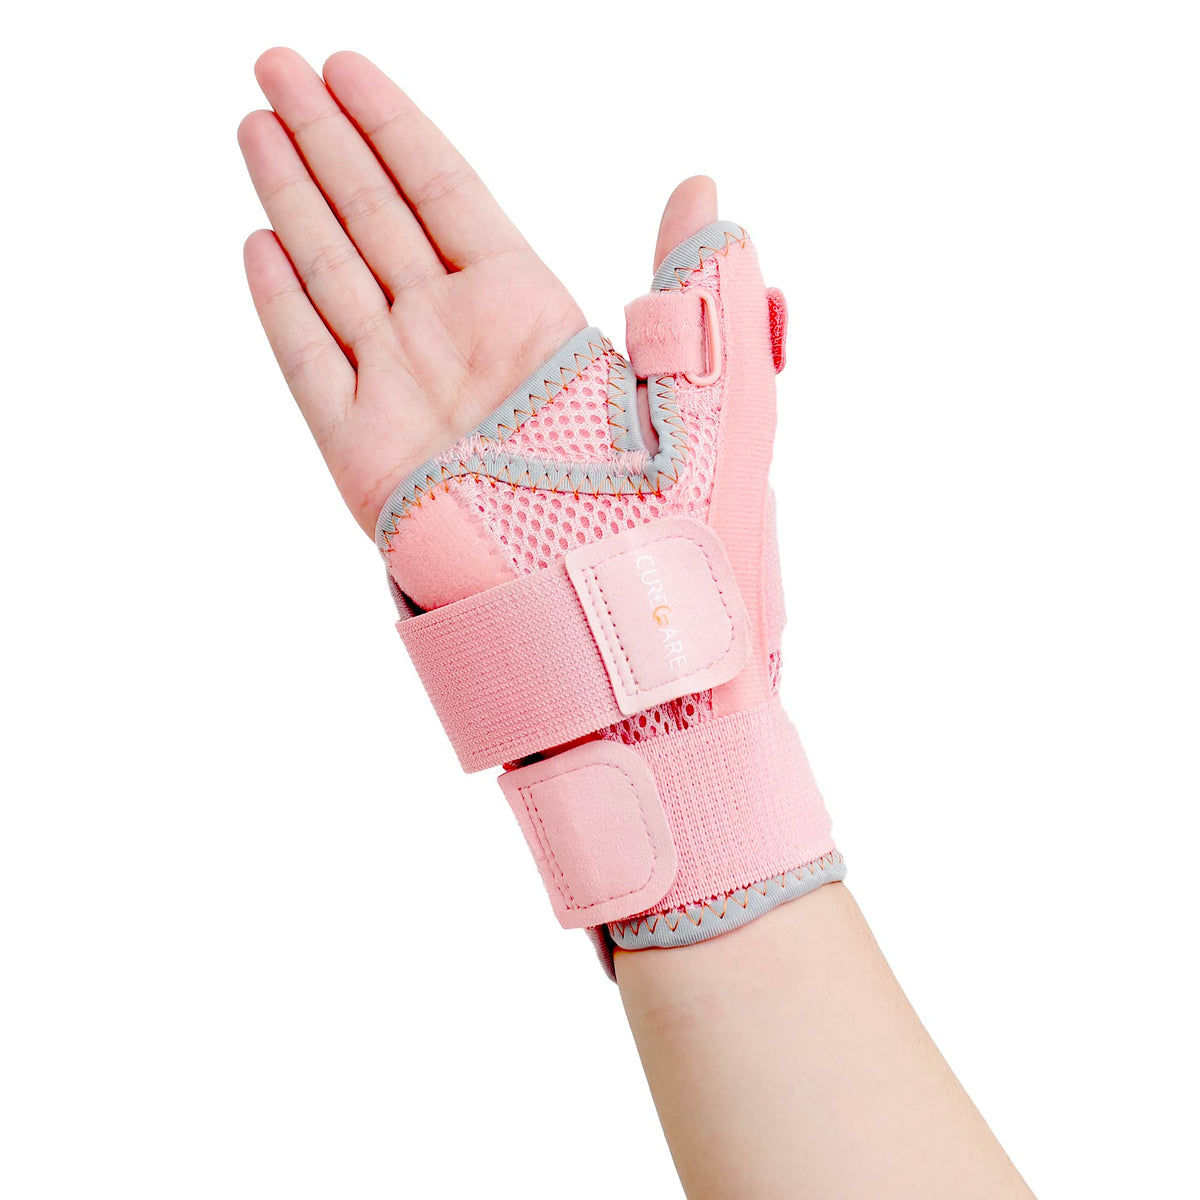 CURECARE New Upgraded Thumb Support for Right & Left Hand, Reversible Thumb Splint for Arthritis Pain And Support, Thumb Brace for Sprains, Tendonitis Relief, One Size Fits Any Hand (Pink)